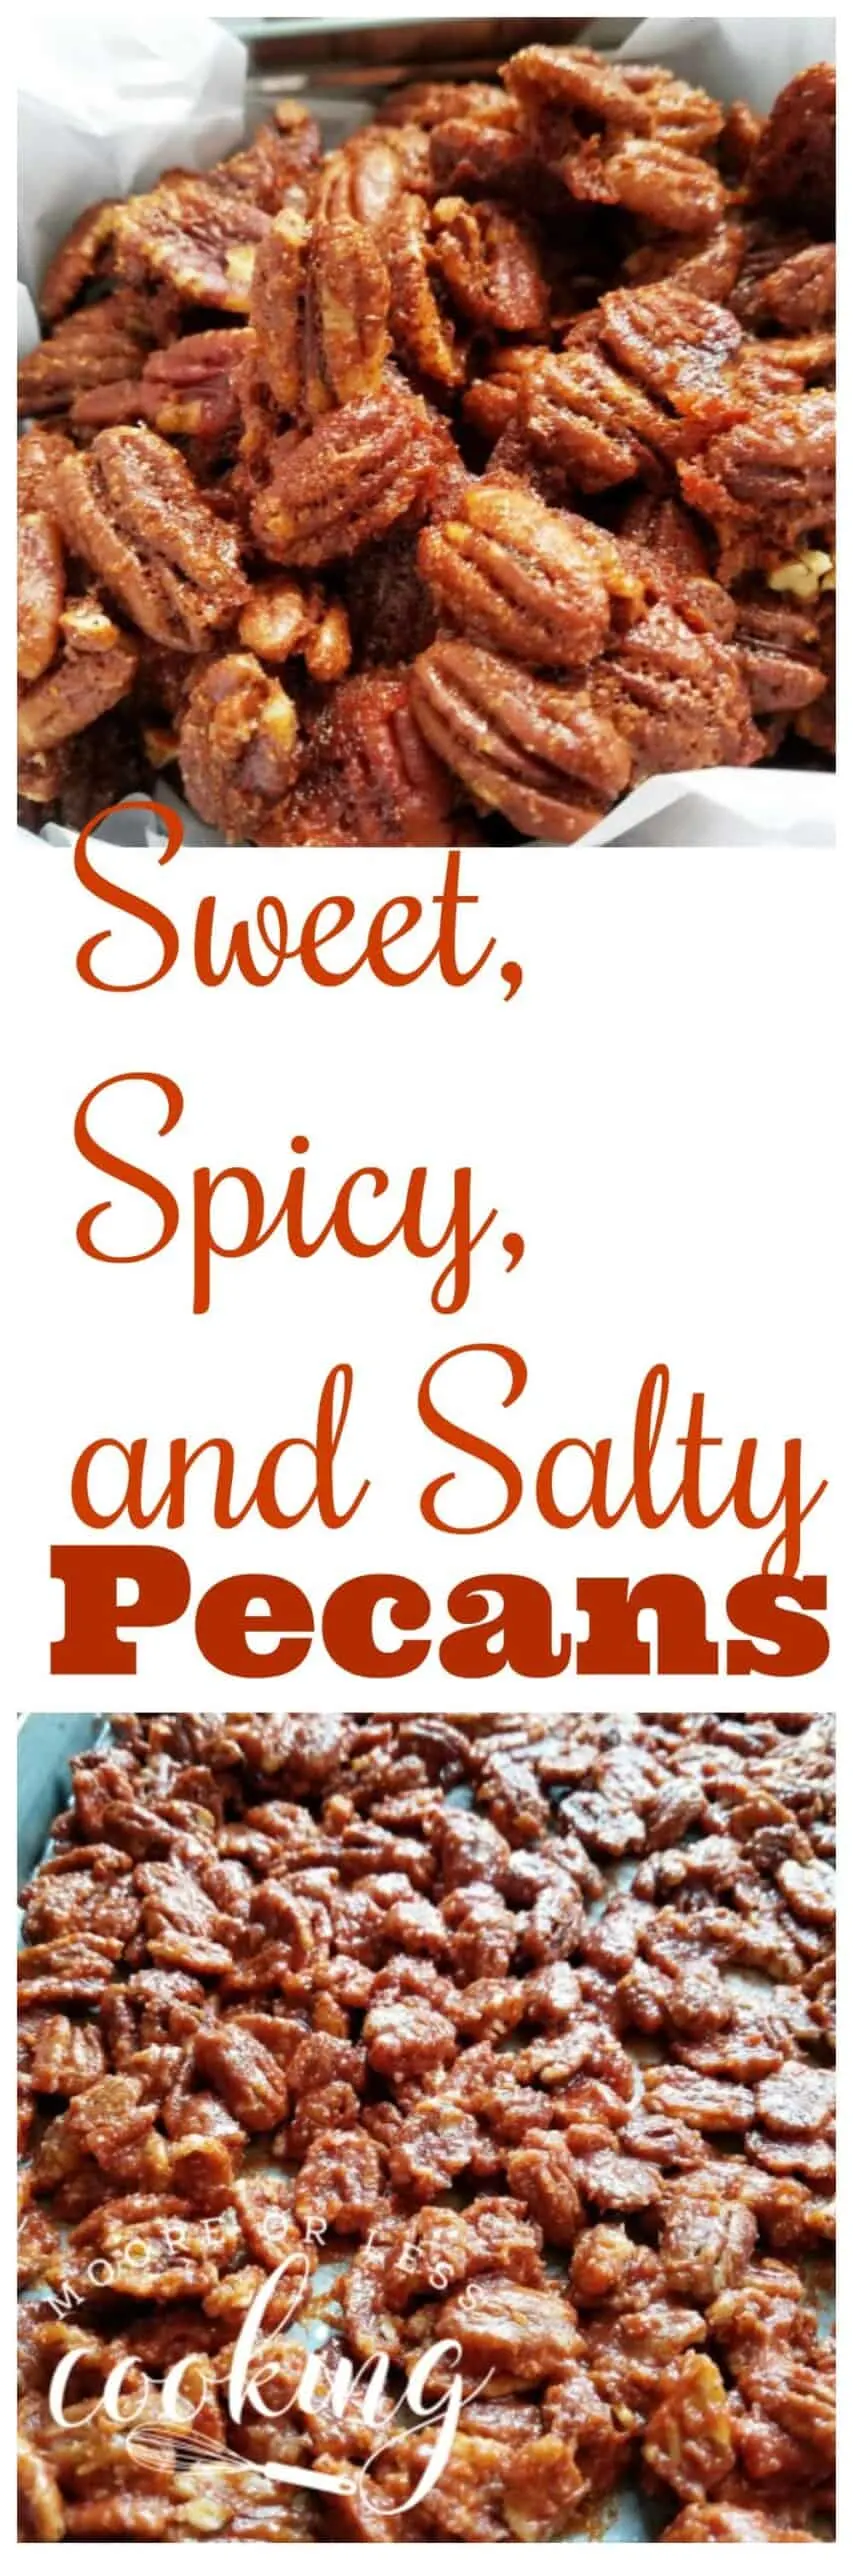 An incredibly tasty combination of sweet, spicy, and salty roasted pecans. Perfect for snacks or as an appetizer or gifts. Use as a topping for your favorite salad, ice cream, or cheesecake. via @Mooreorlesscook